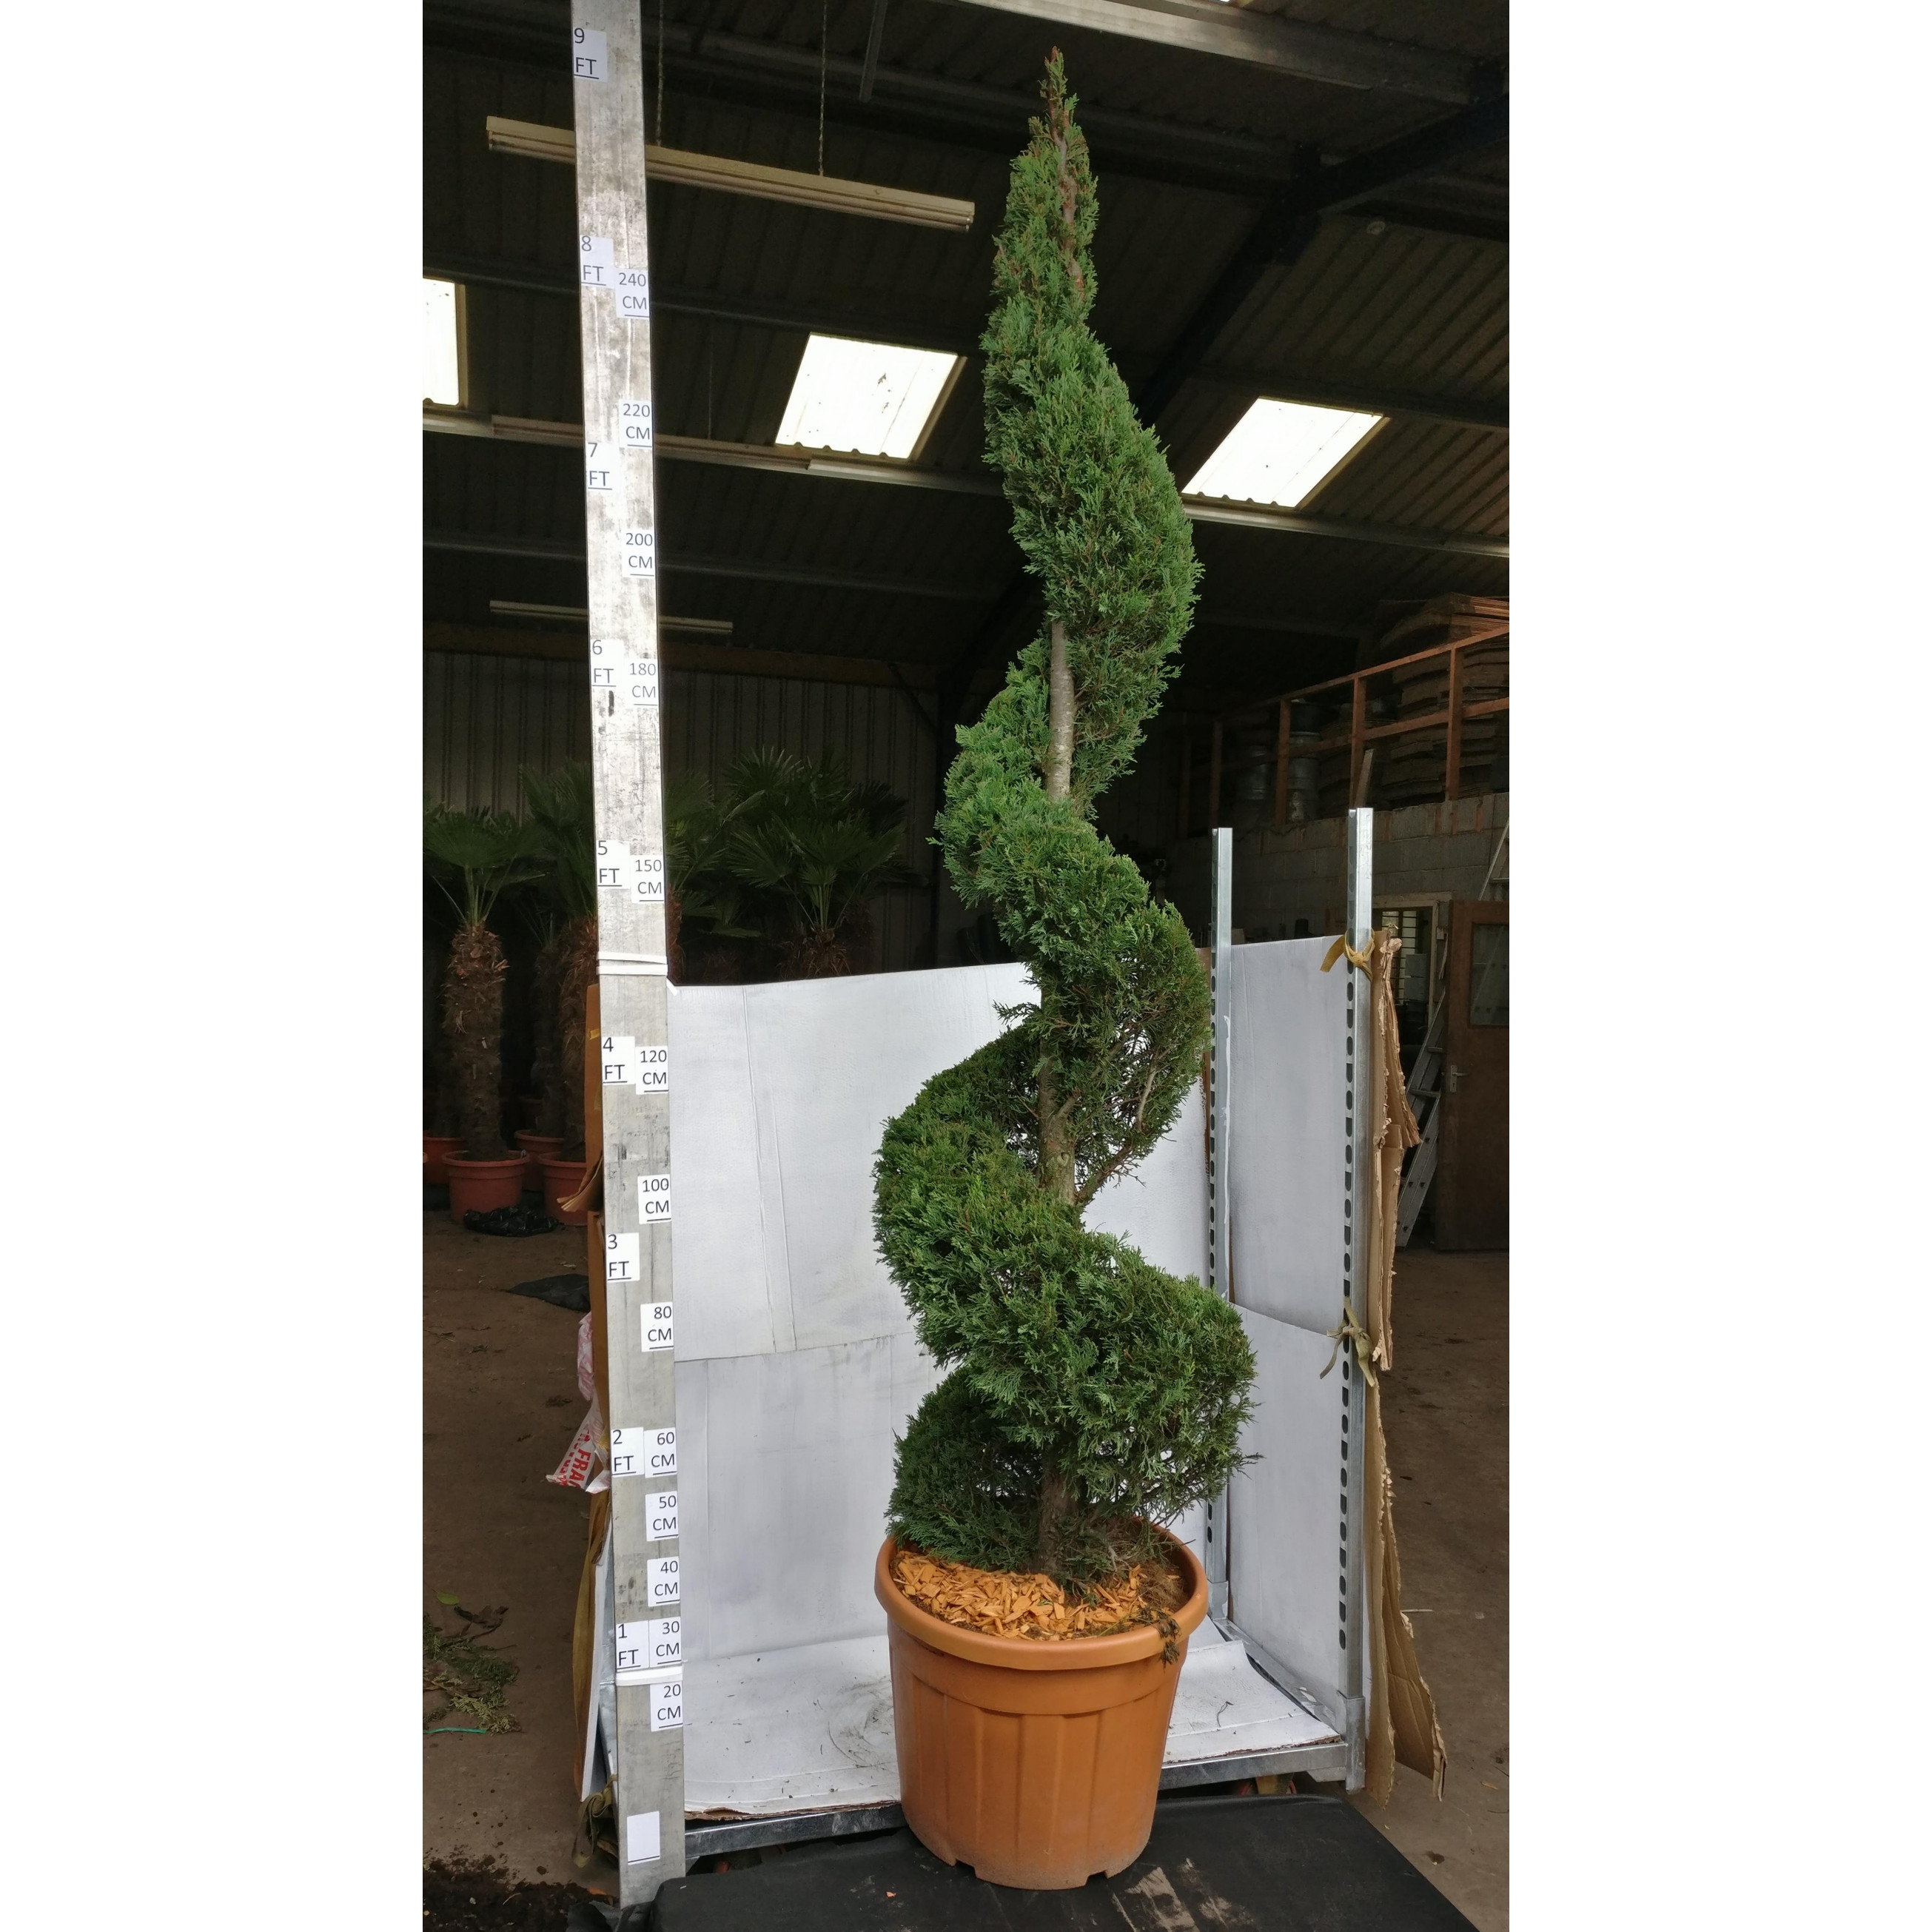 Golden Leylandii Spiral 8ft 6in/250cm tall including height of the pot